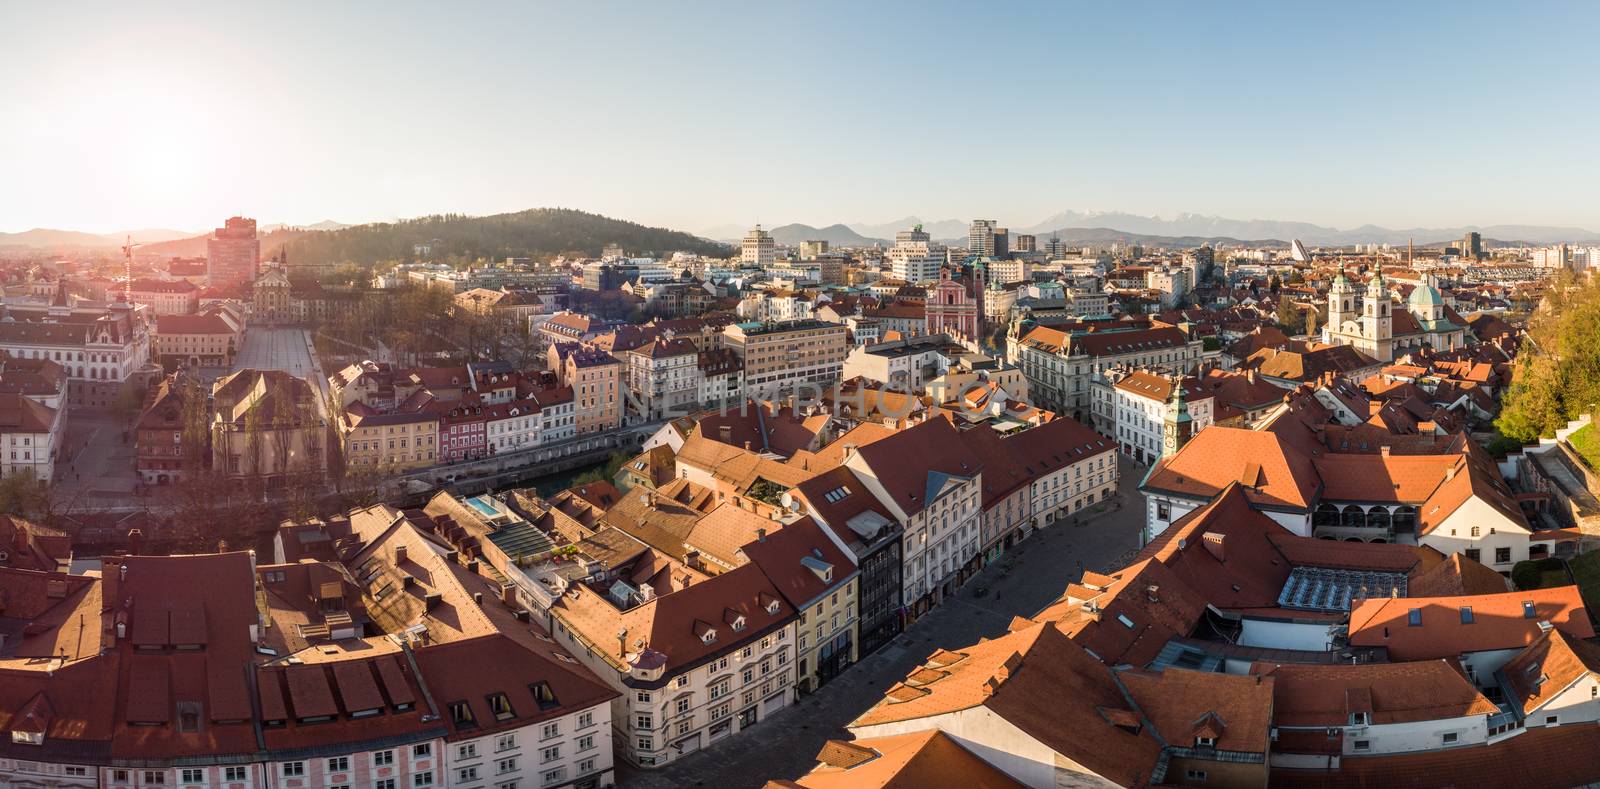 Panoramic view of Ljubljana, capital of Slovenia, at sunset. Empty streets of Slovenian capital during corona virus pandemic social distancing measures in 2020 by kasto